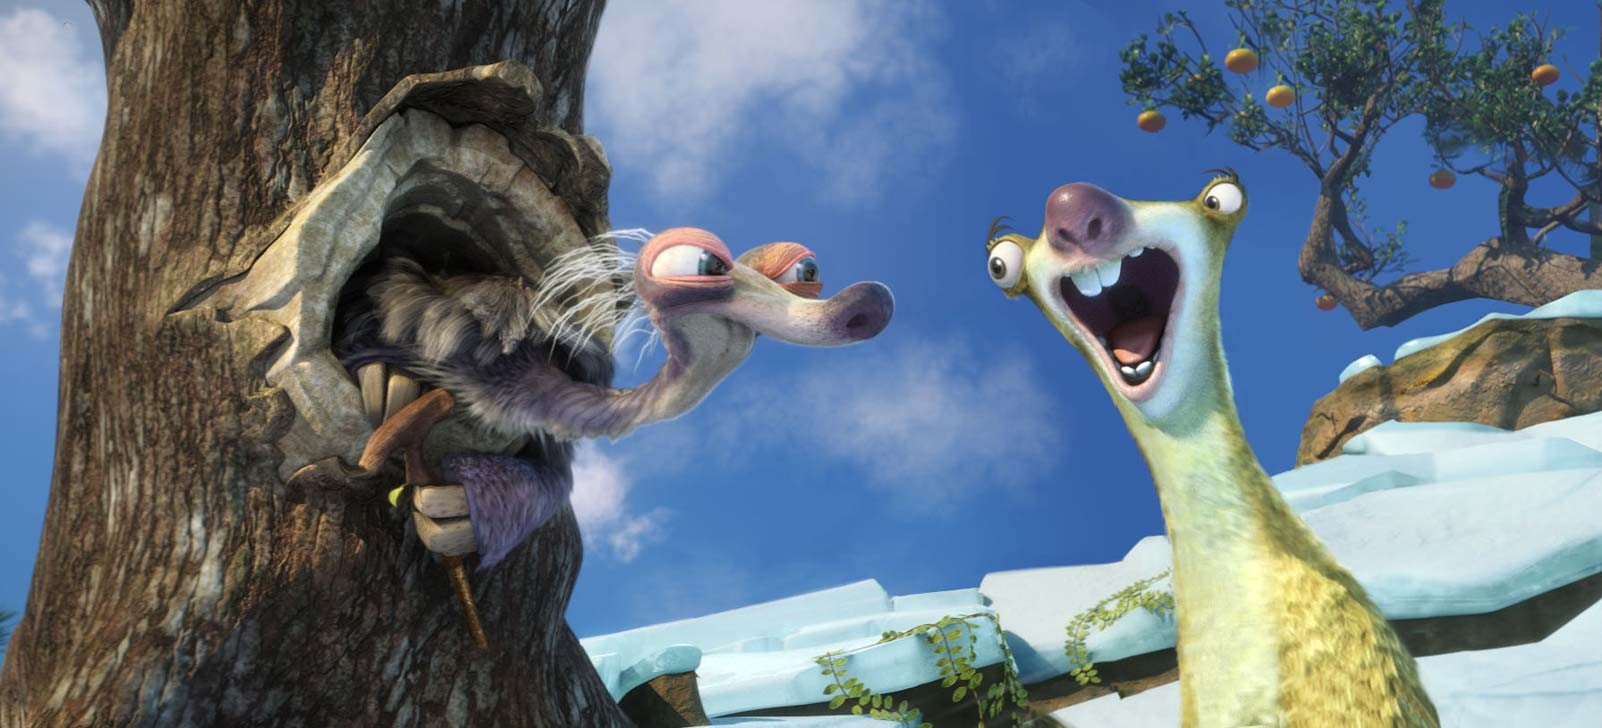 Granny and Sid from 20th Century Fox's Ice Age: Continental Drift (2012)